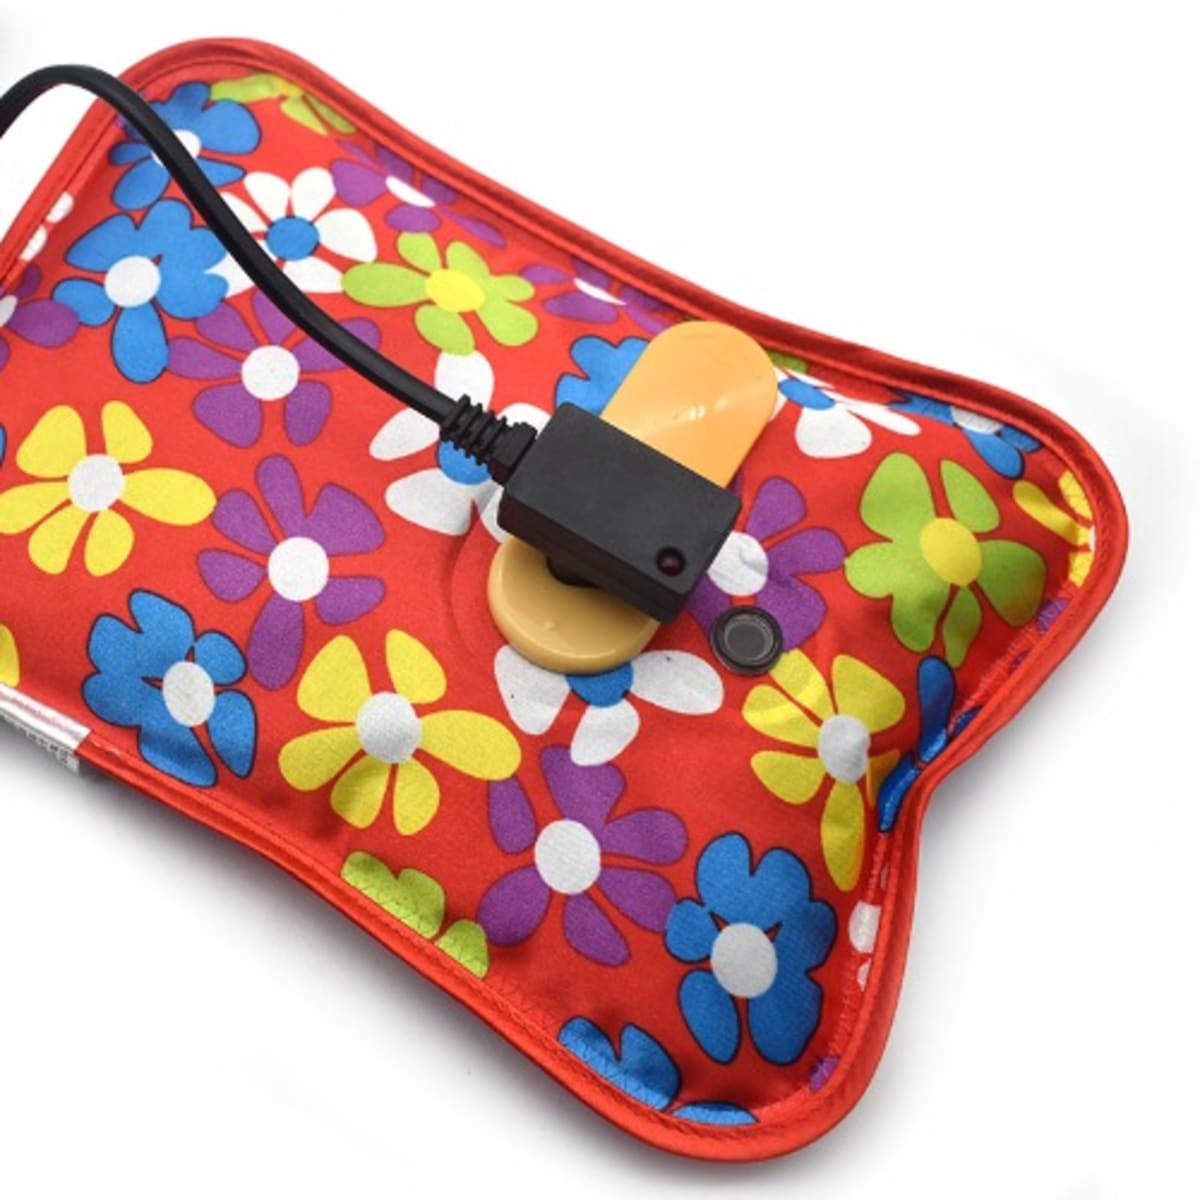 Cute Plush Hot Water Bag For Pain Relief